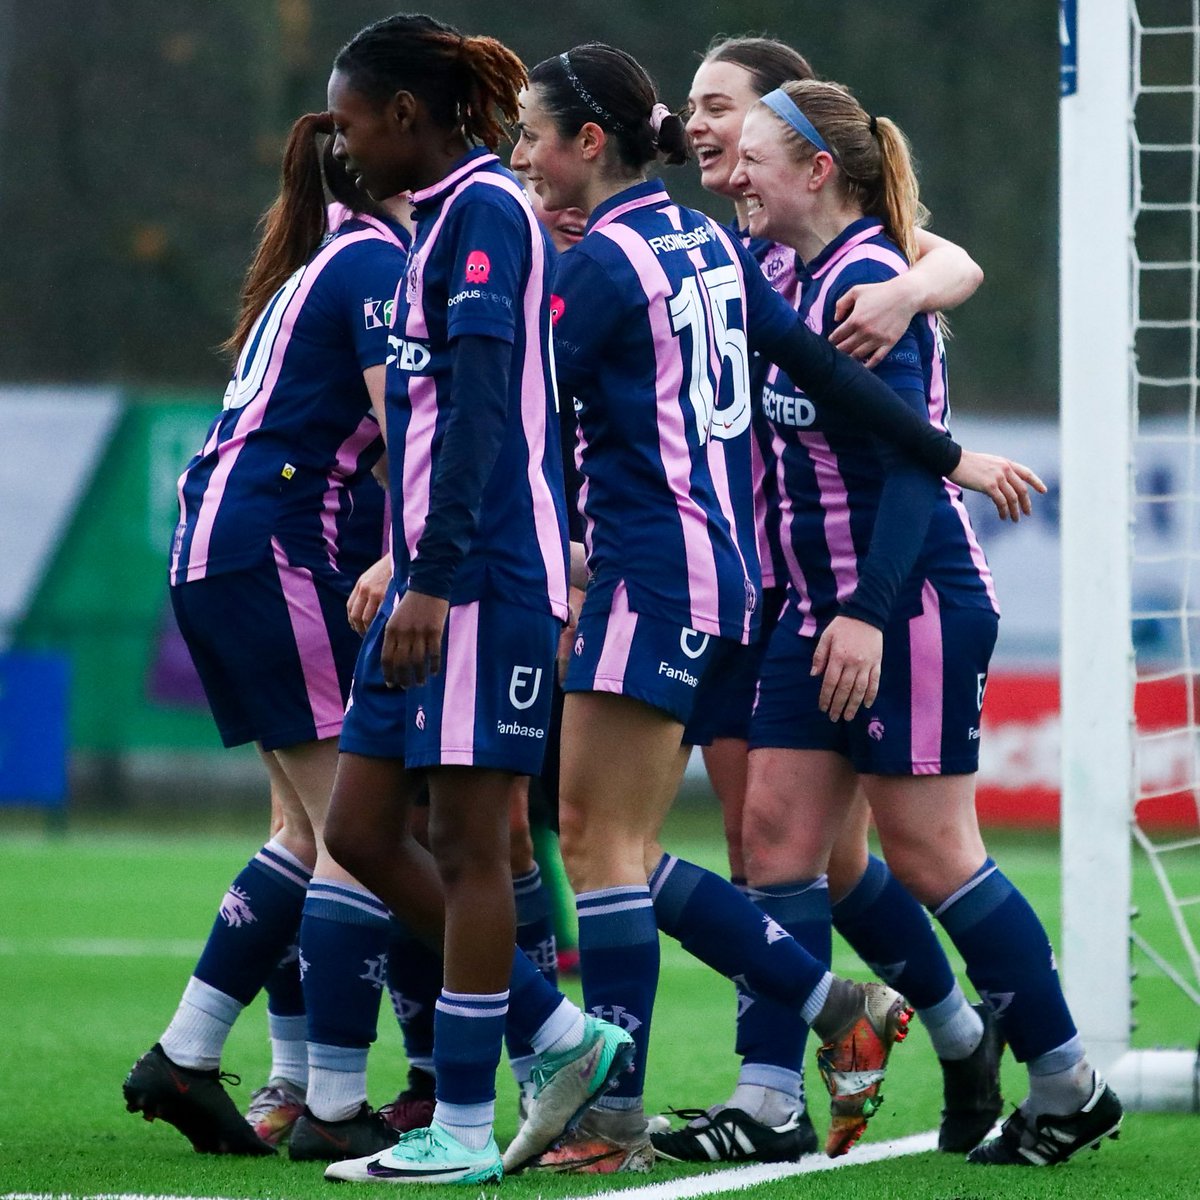 We'd like to thank everyone who has expressed interest in our trials next month. Our management team will be in contact over the coming weeks. Still interested? Fill out a form here 👉 forms.office.com/e/X6Th81LmDk #DHFC 💖💙 #Spicy 🌶